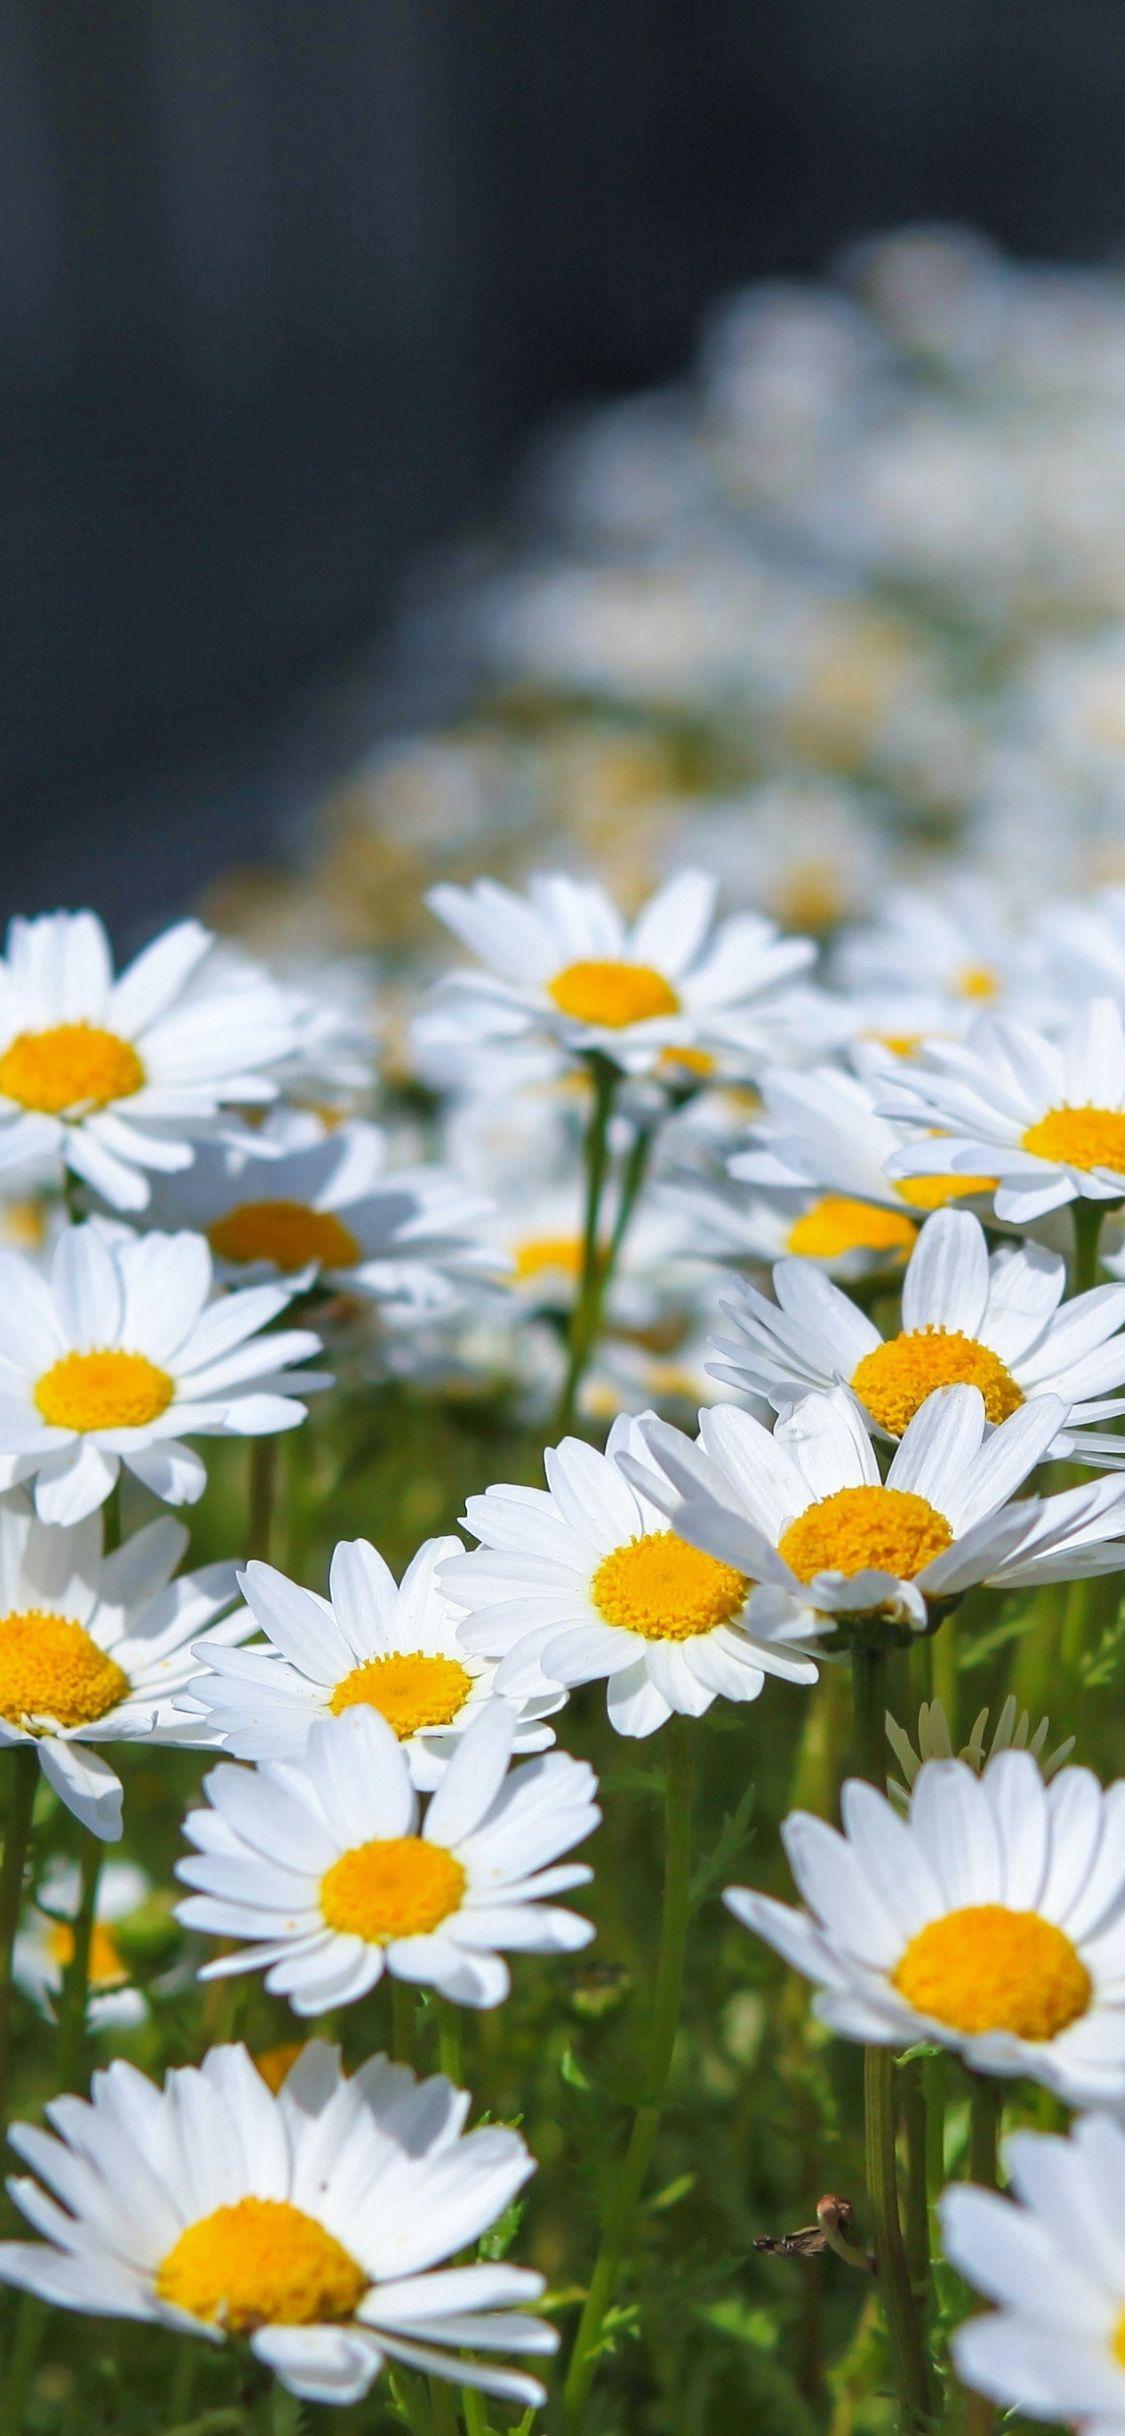 100 Beautiful Daisy Wallpapers For Phones  The XO Factor